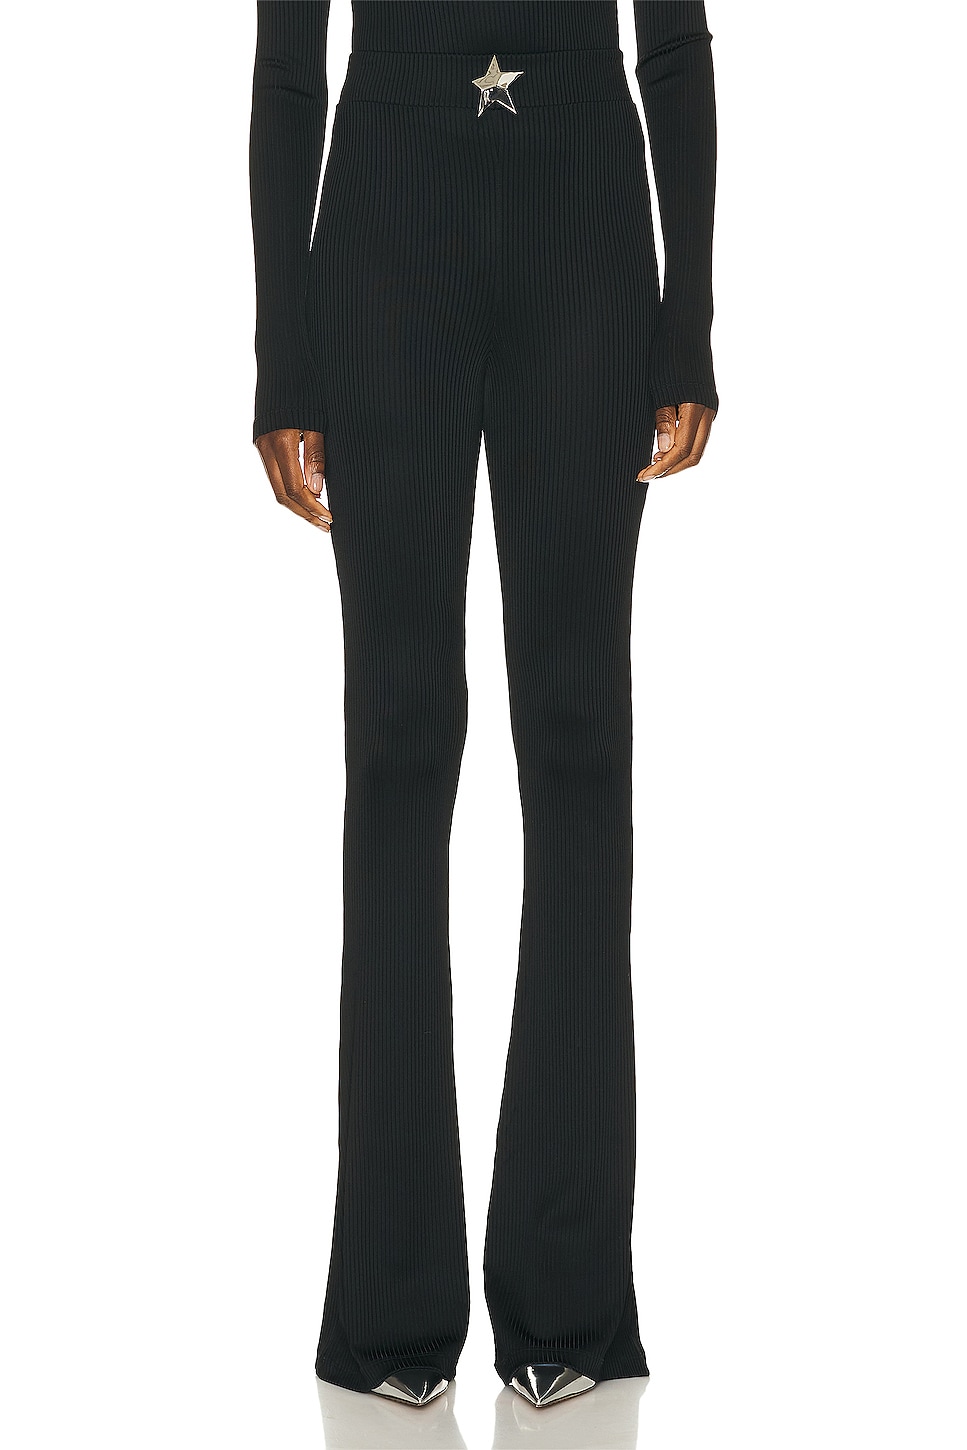 Image 1 of AREA Star Stud Flare Pant in Black